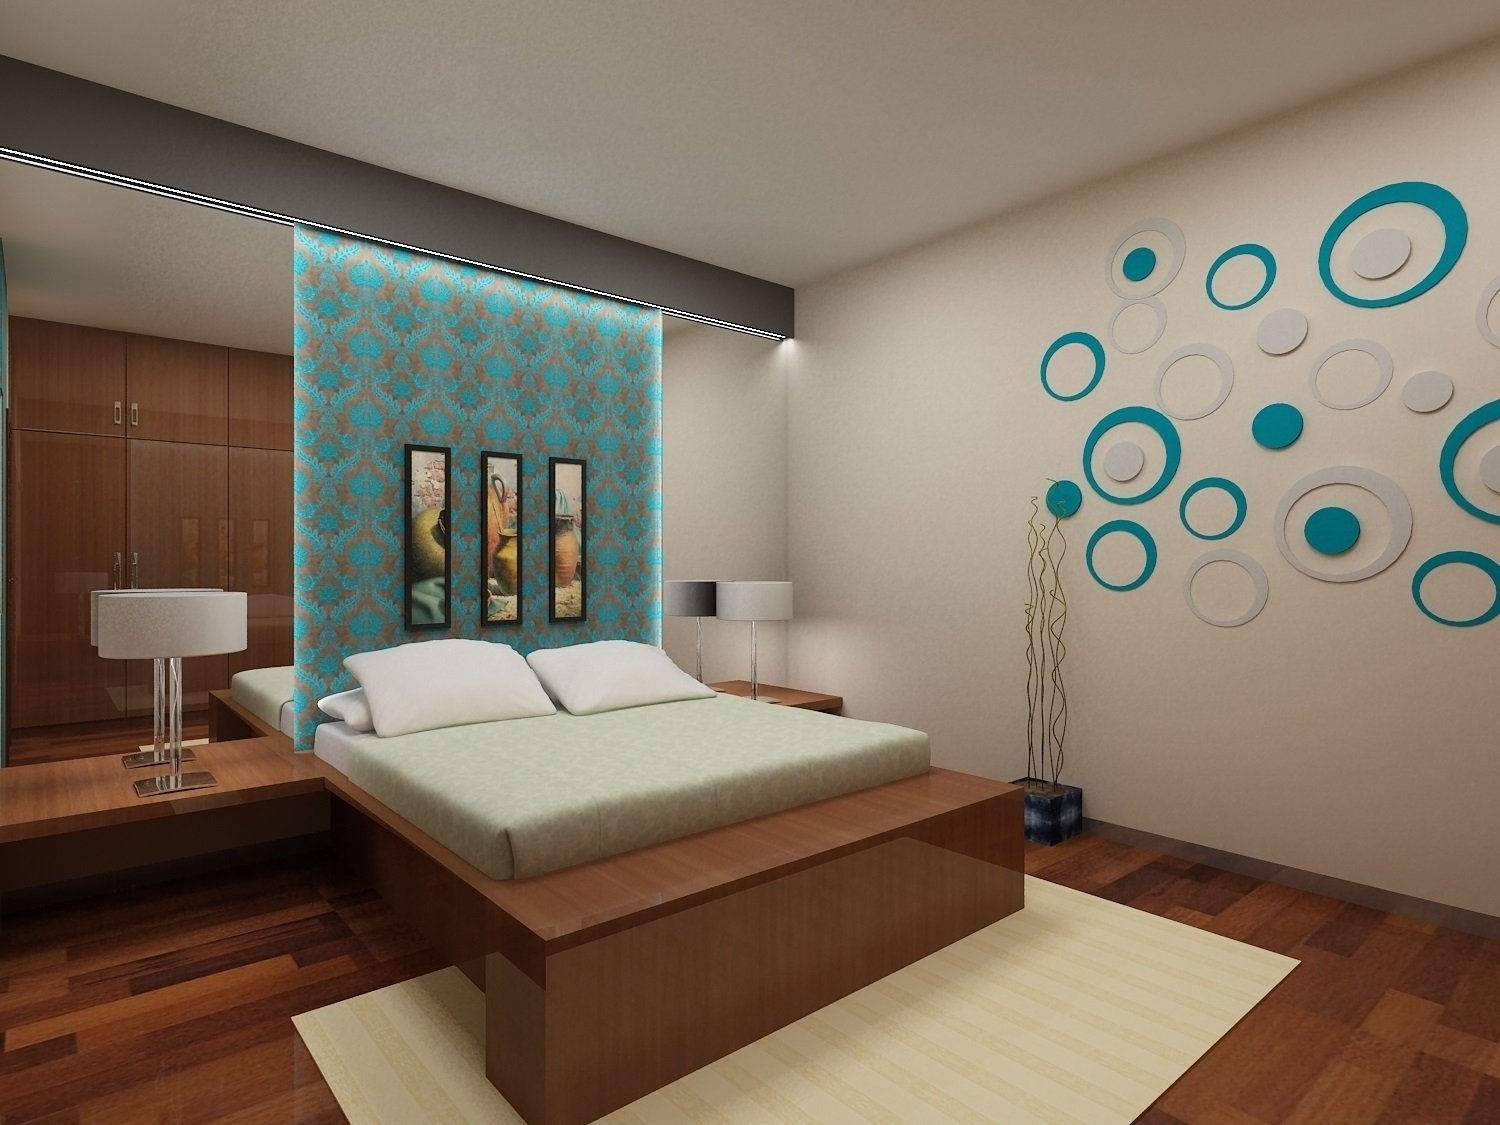 Hire Best Interior Designers in Bangalore to Your Dream Home